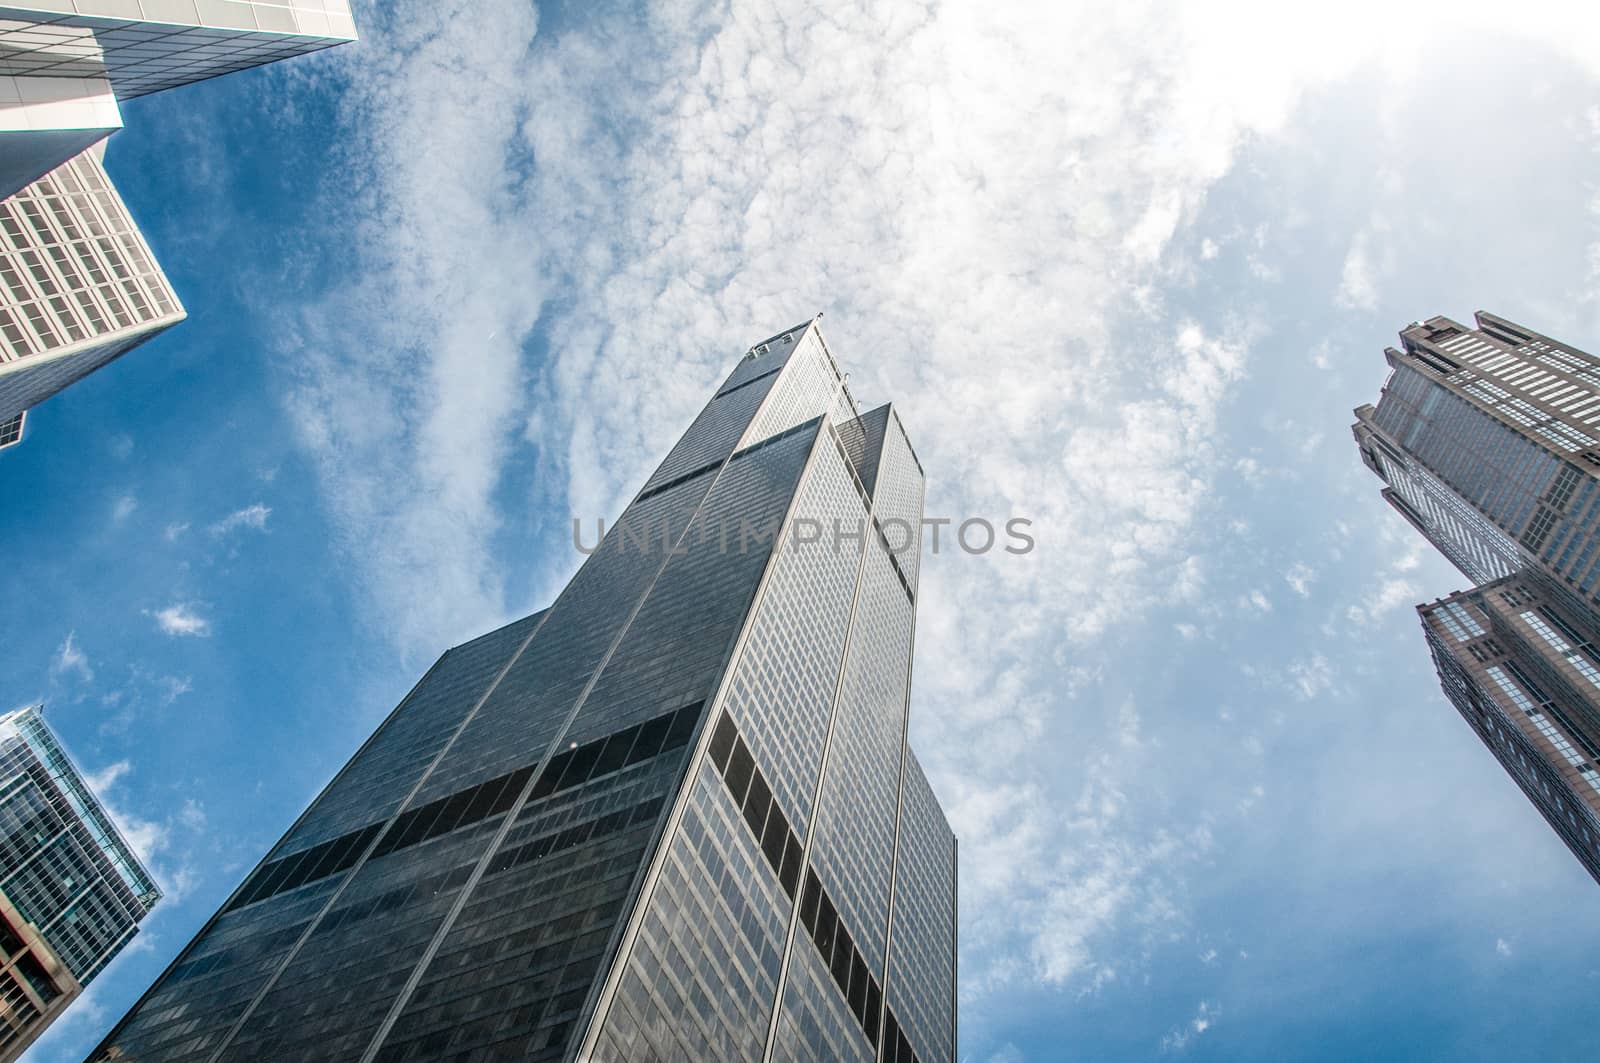 Sears Willis tower under bright blue sky and cluds